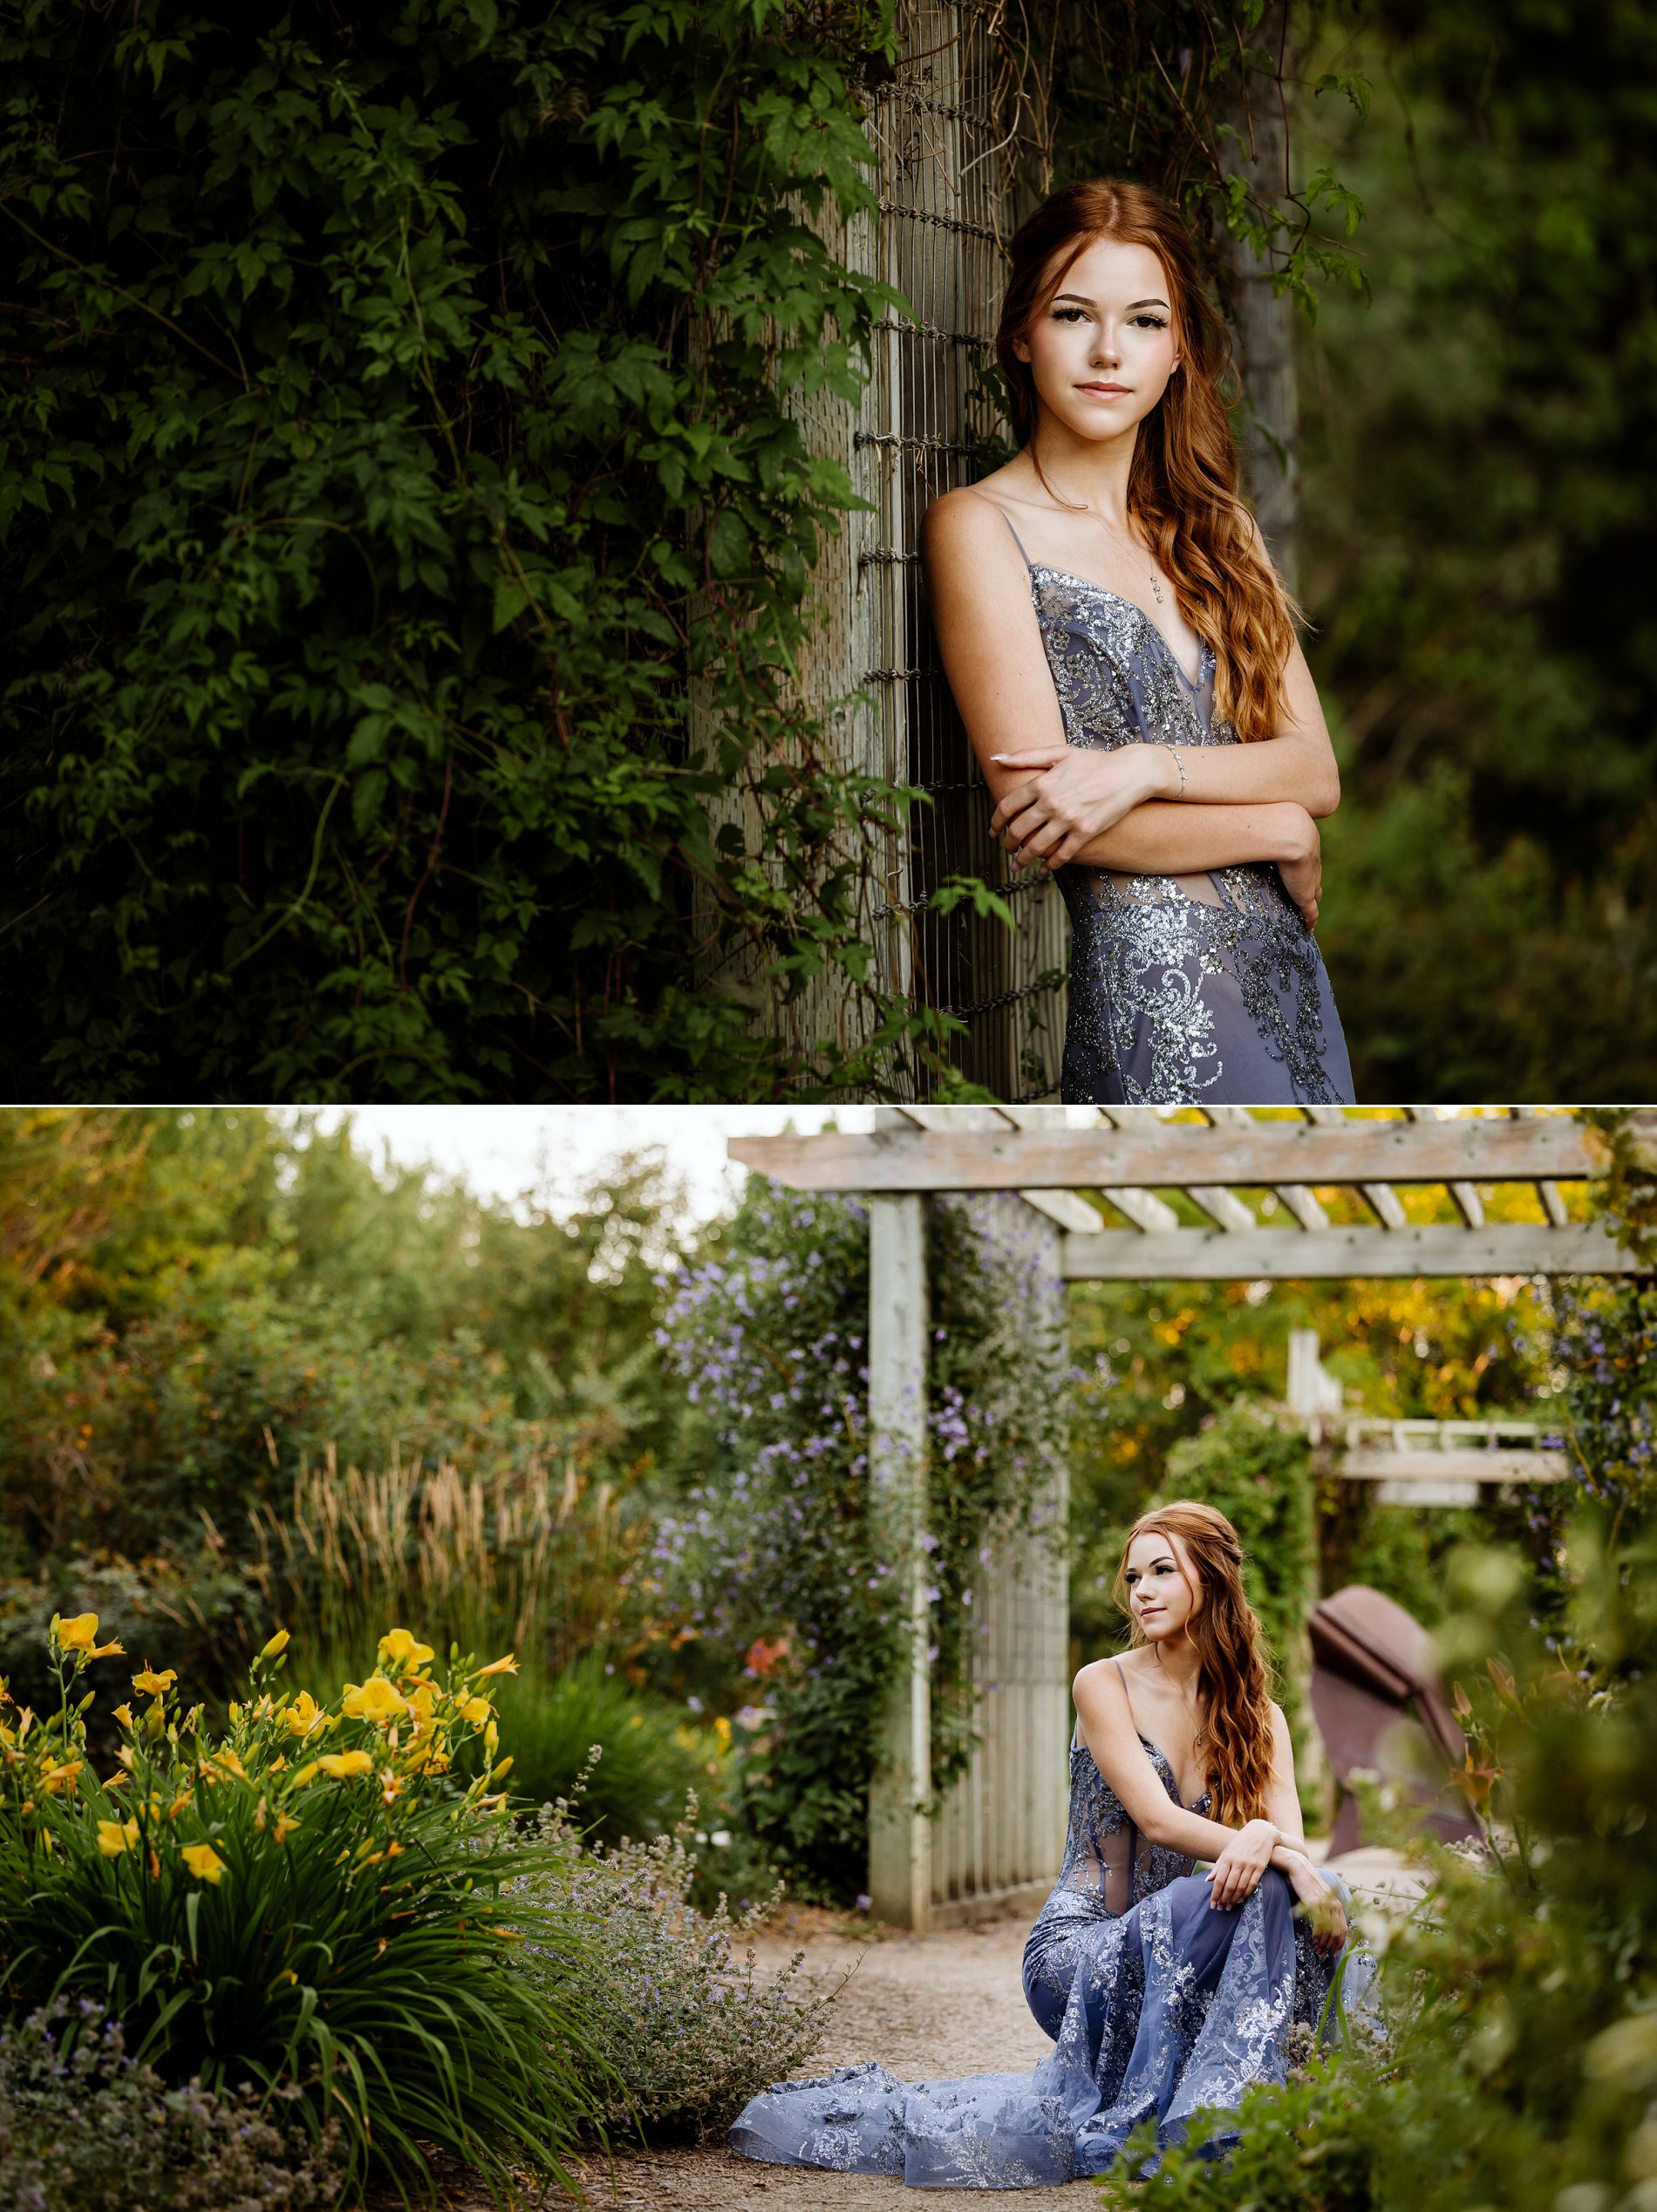 Spots for graduation portraits in a whimsical garden at the Forestry Farm